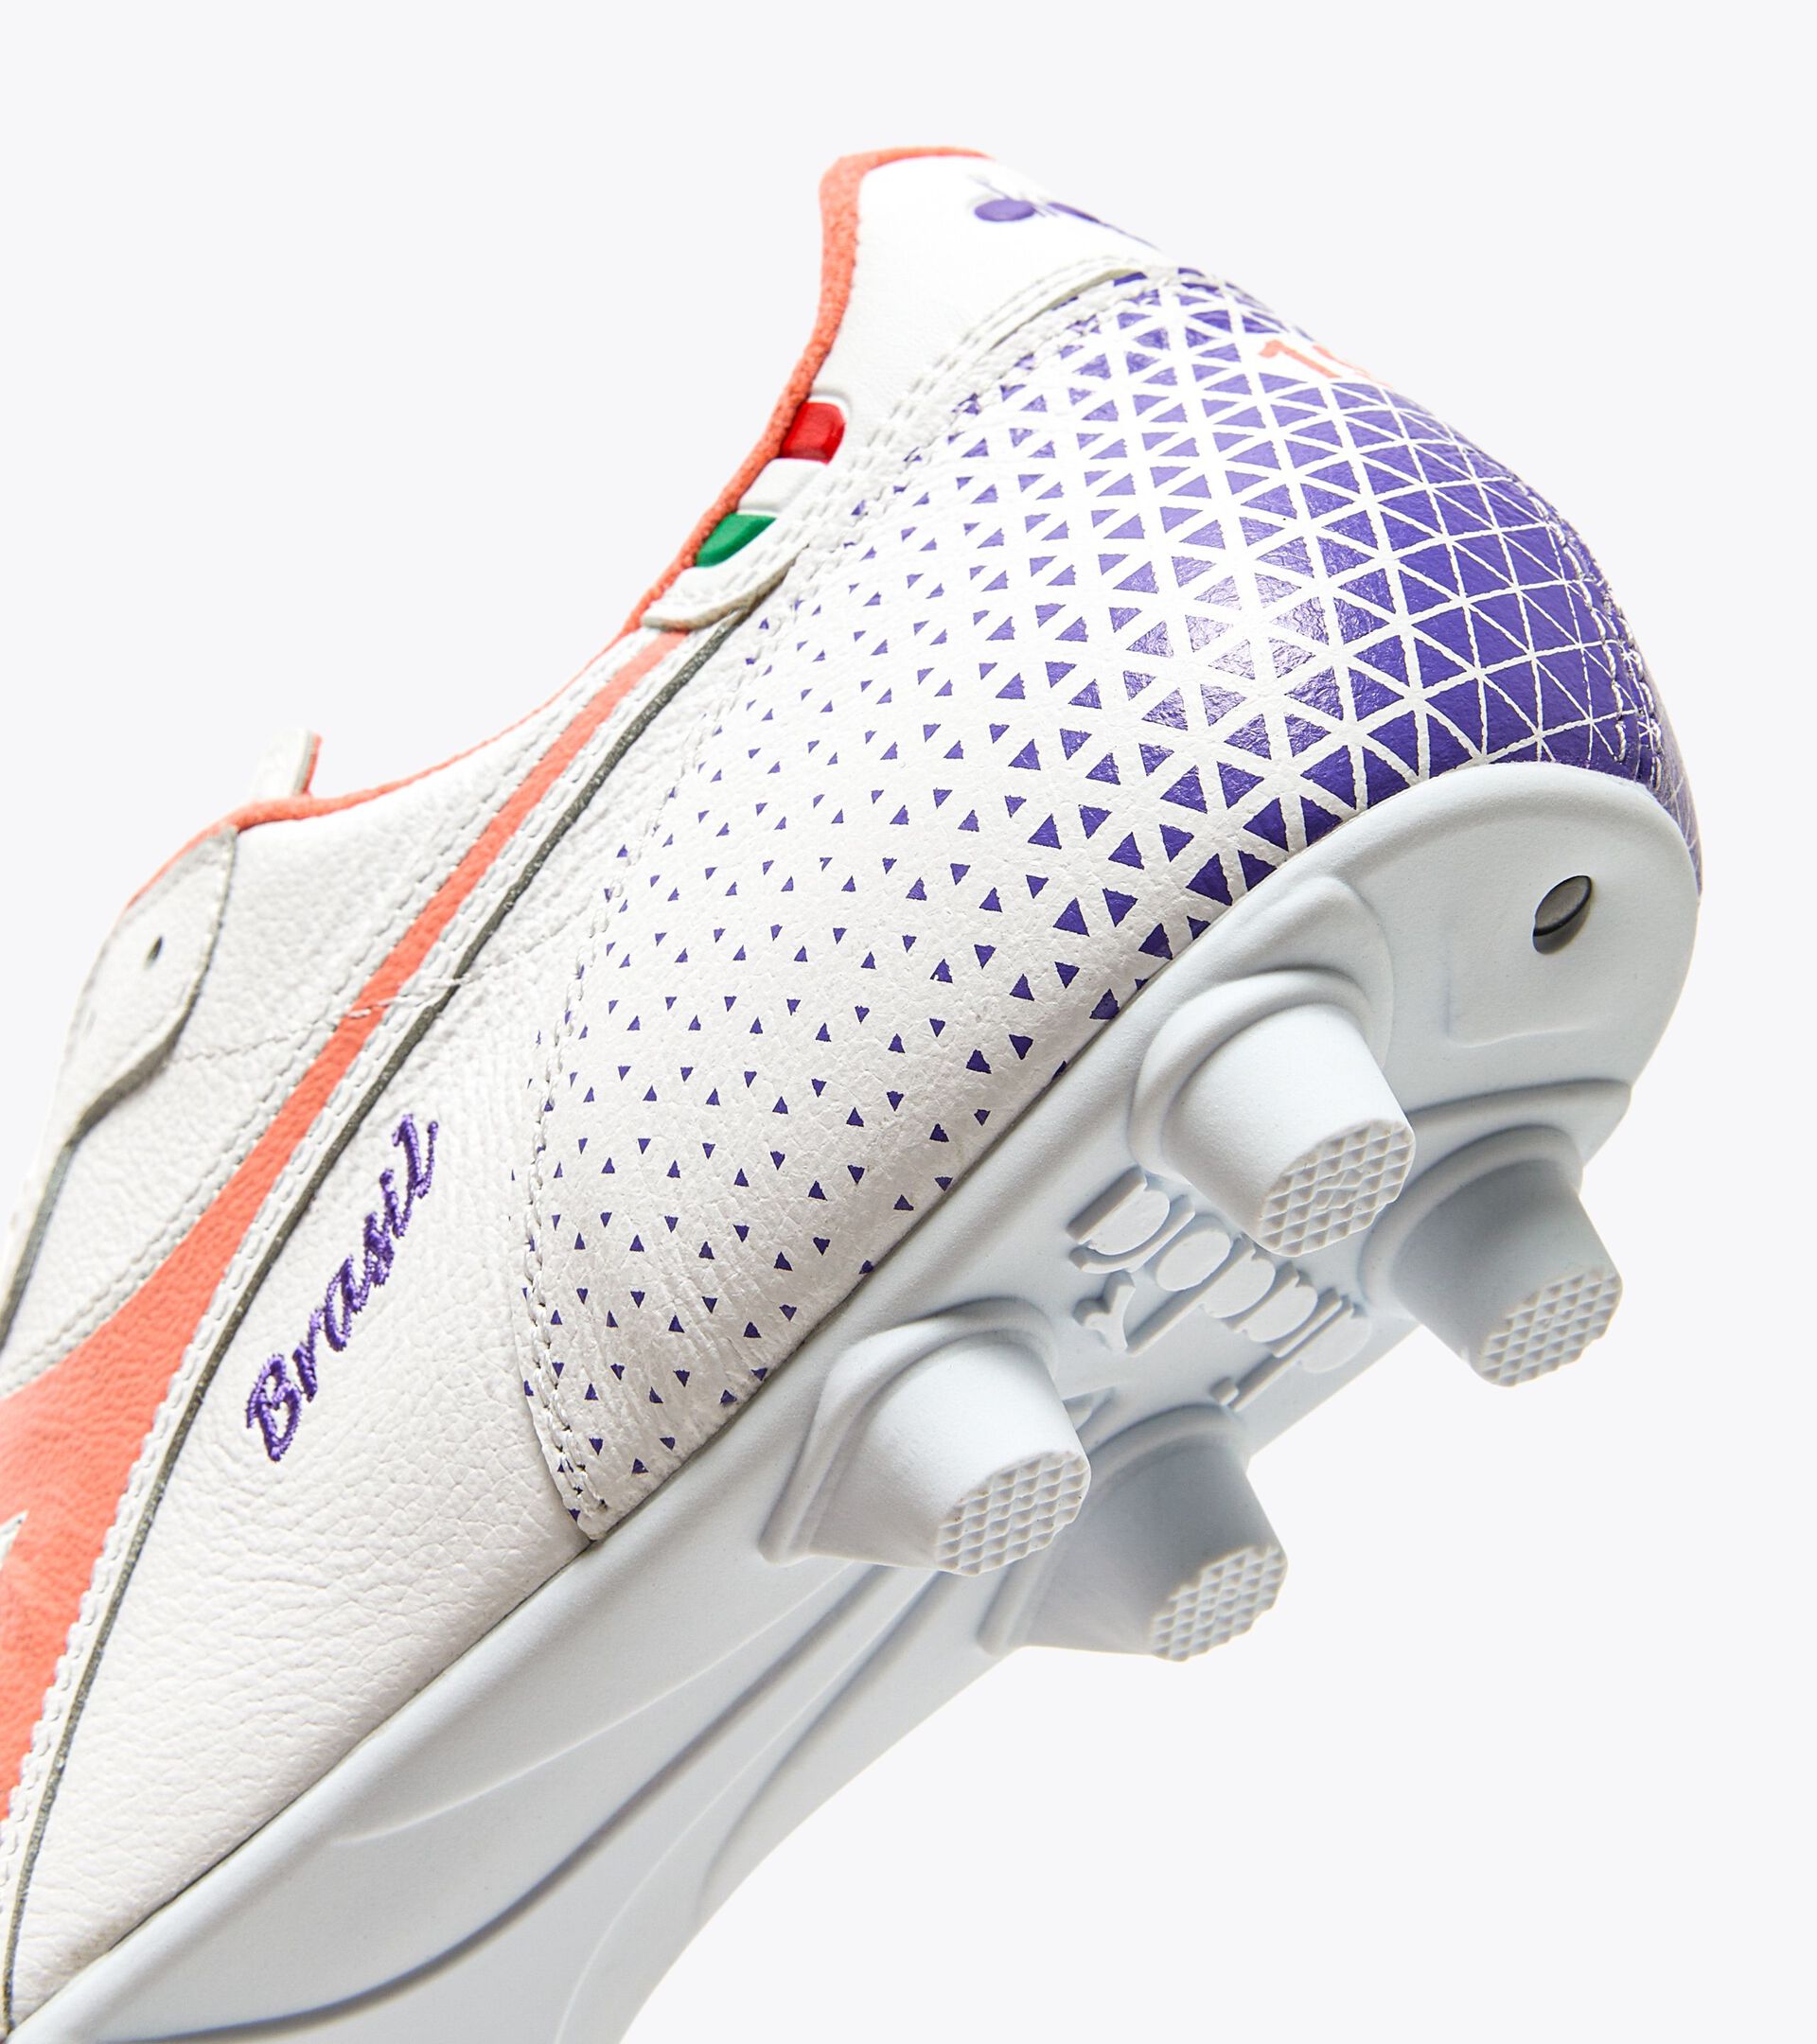 Calcio boots for firm grounds - Made in Italy - Gender Neutral BRASIL ITALY OG GR LT+  MDPU WHITE/FRESH SALMON - Diadora